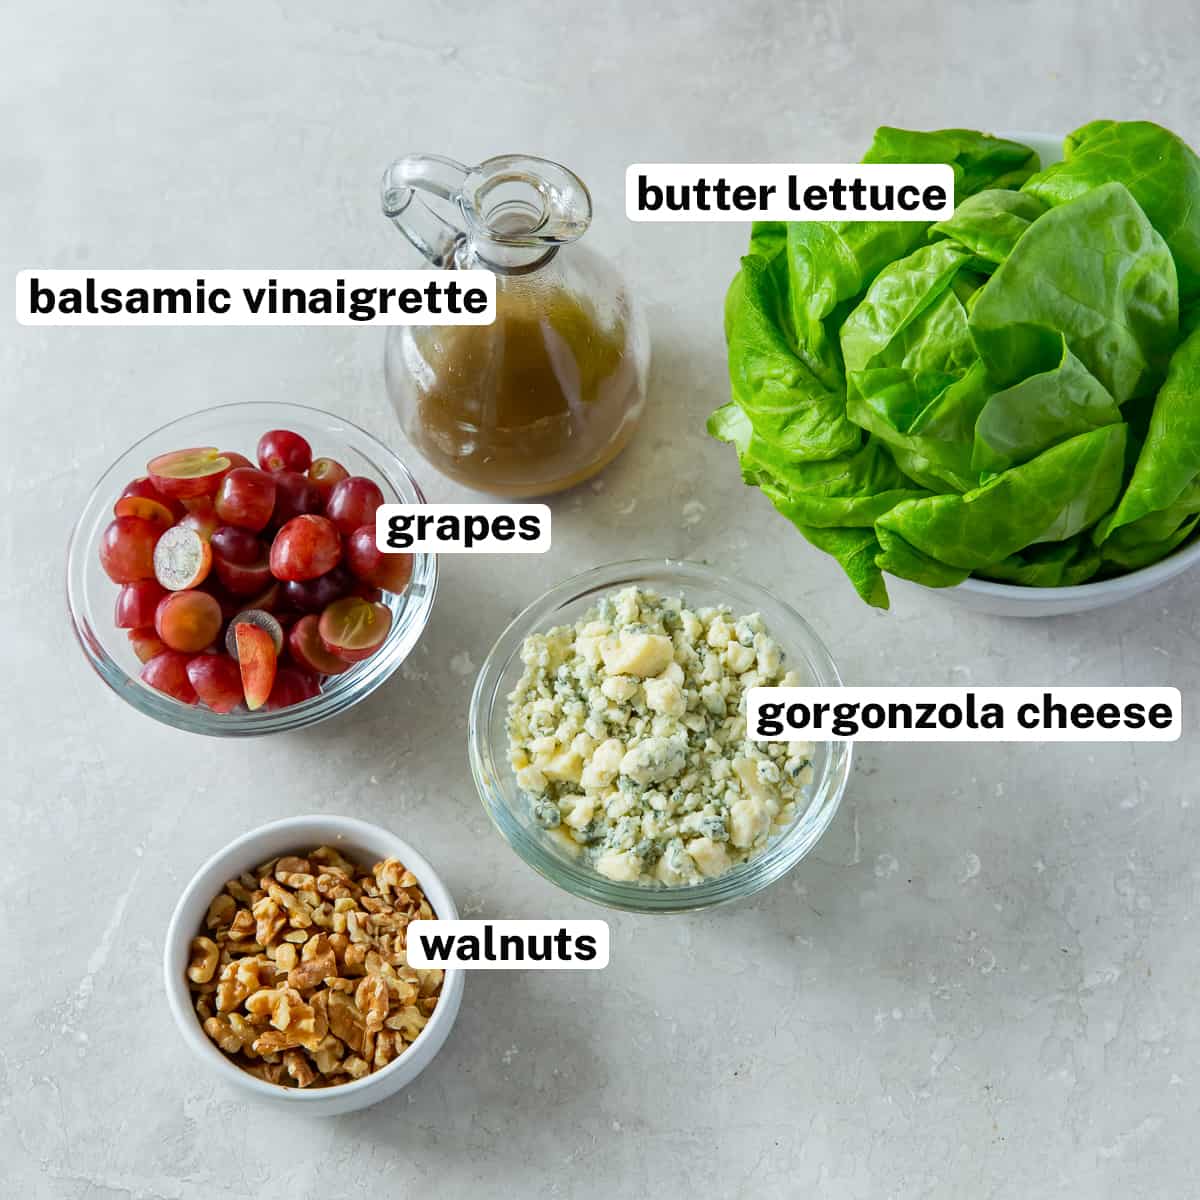 Butter lettuce, grapes, gorzonzola, walnuts, and dressing with overlay text.